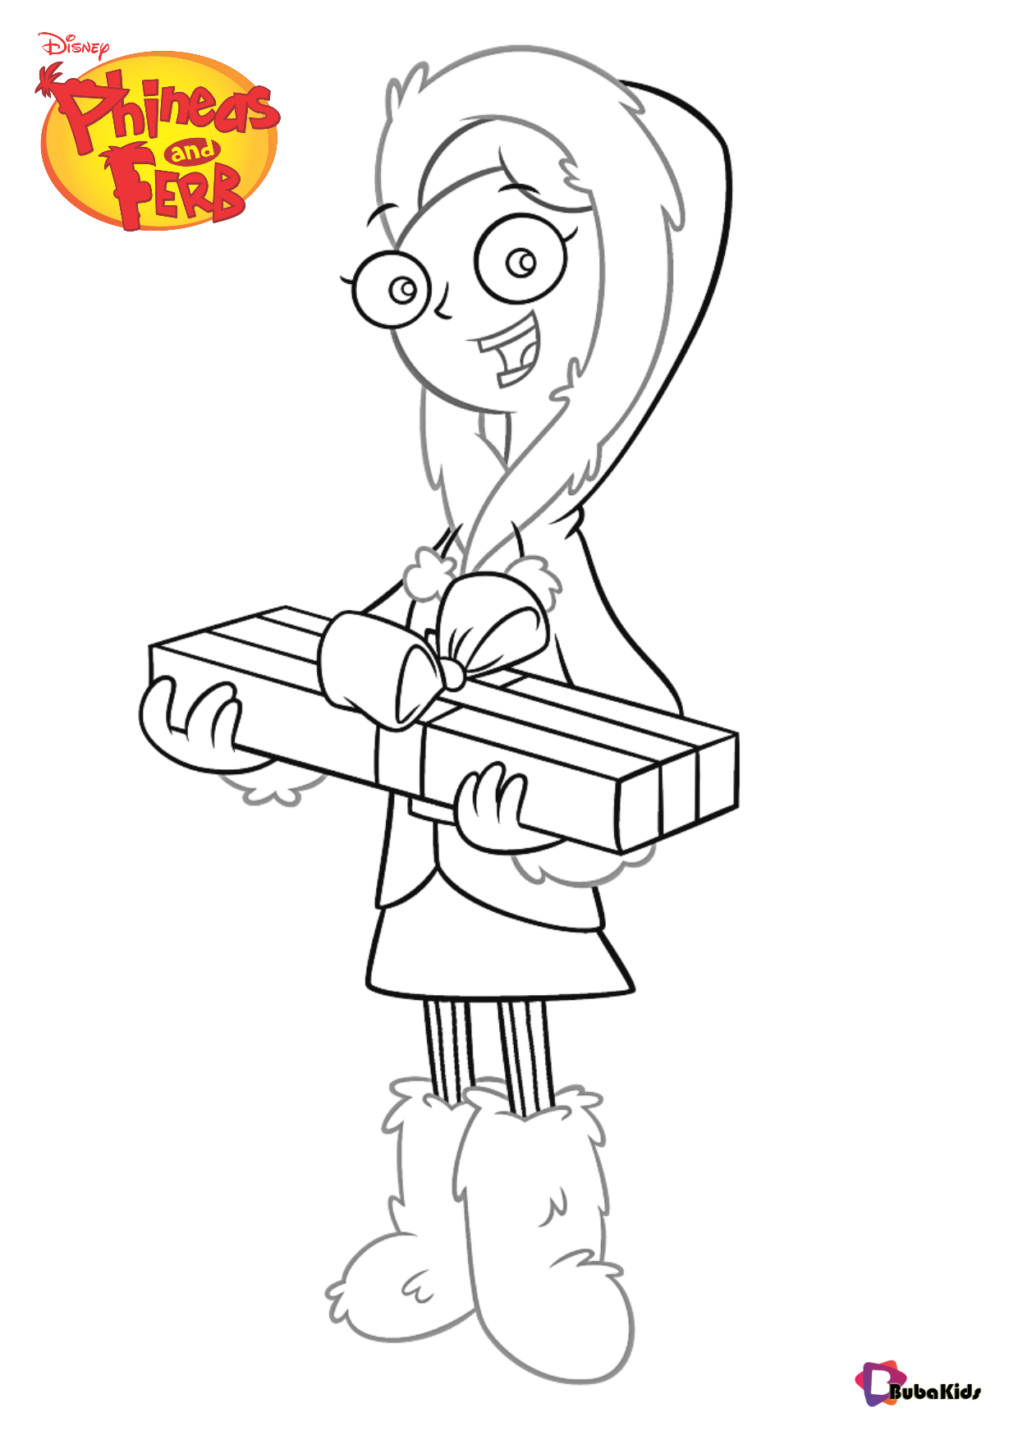 Phineas and Ferb coloring sheet Candace Flynn coloring pages